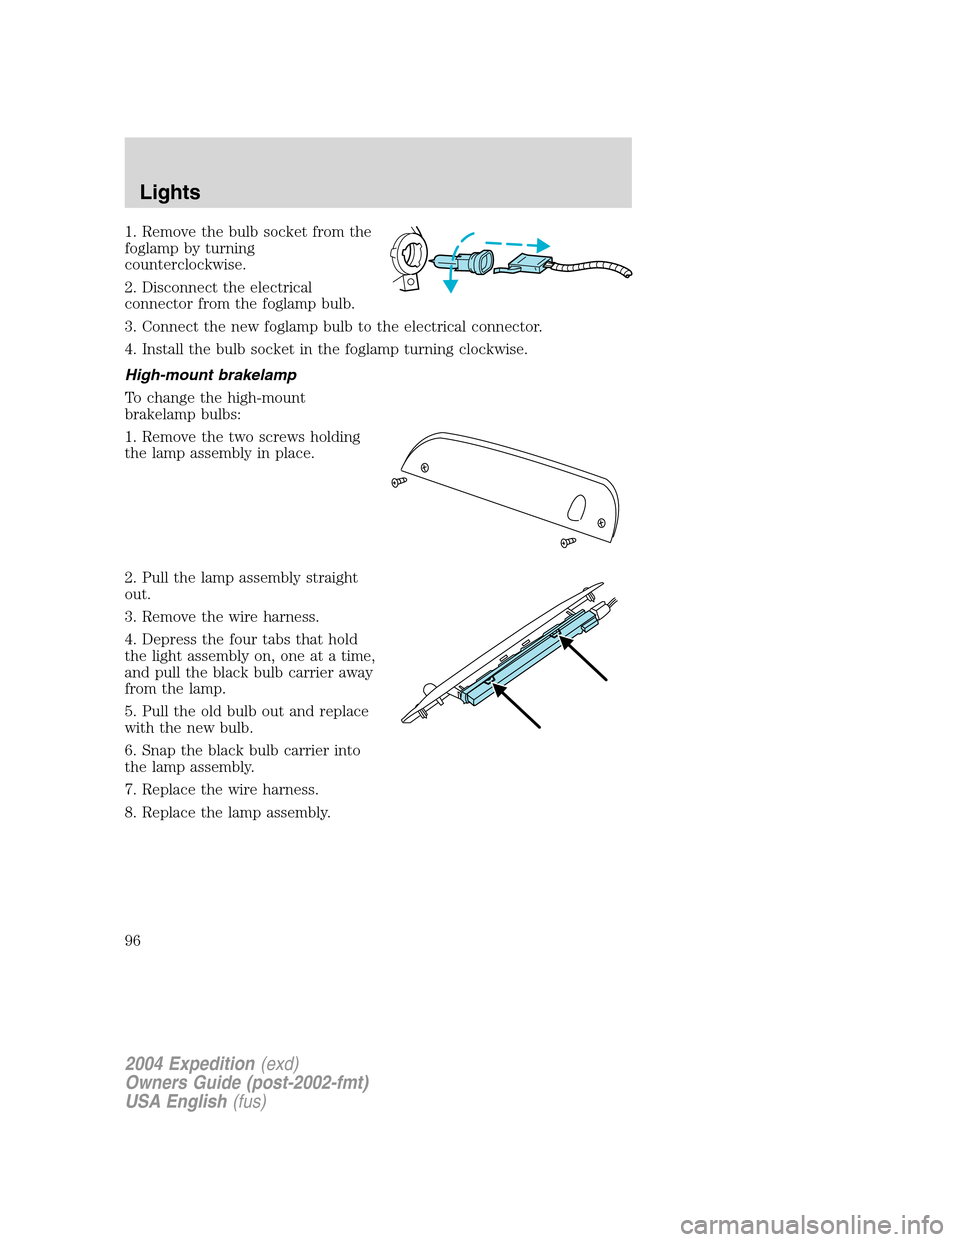 FORD EXPEDITION 2004 2.G Owners Manual 1. Remove the bulb socket from the
foglamp by turning
counterclockwise.
2. Disconnect the electrical
connector from the foglamp bulb.
3. Connect the new foglamp bulb to the electrical connector.
4. In